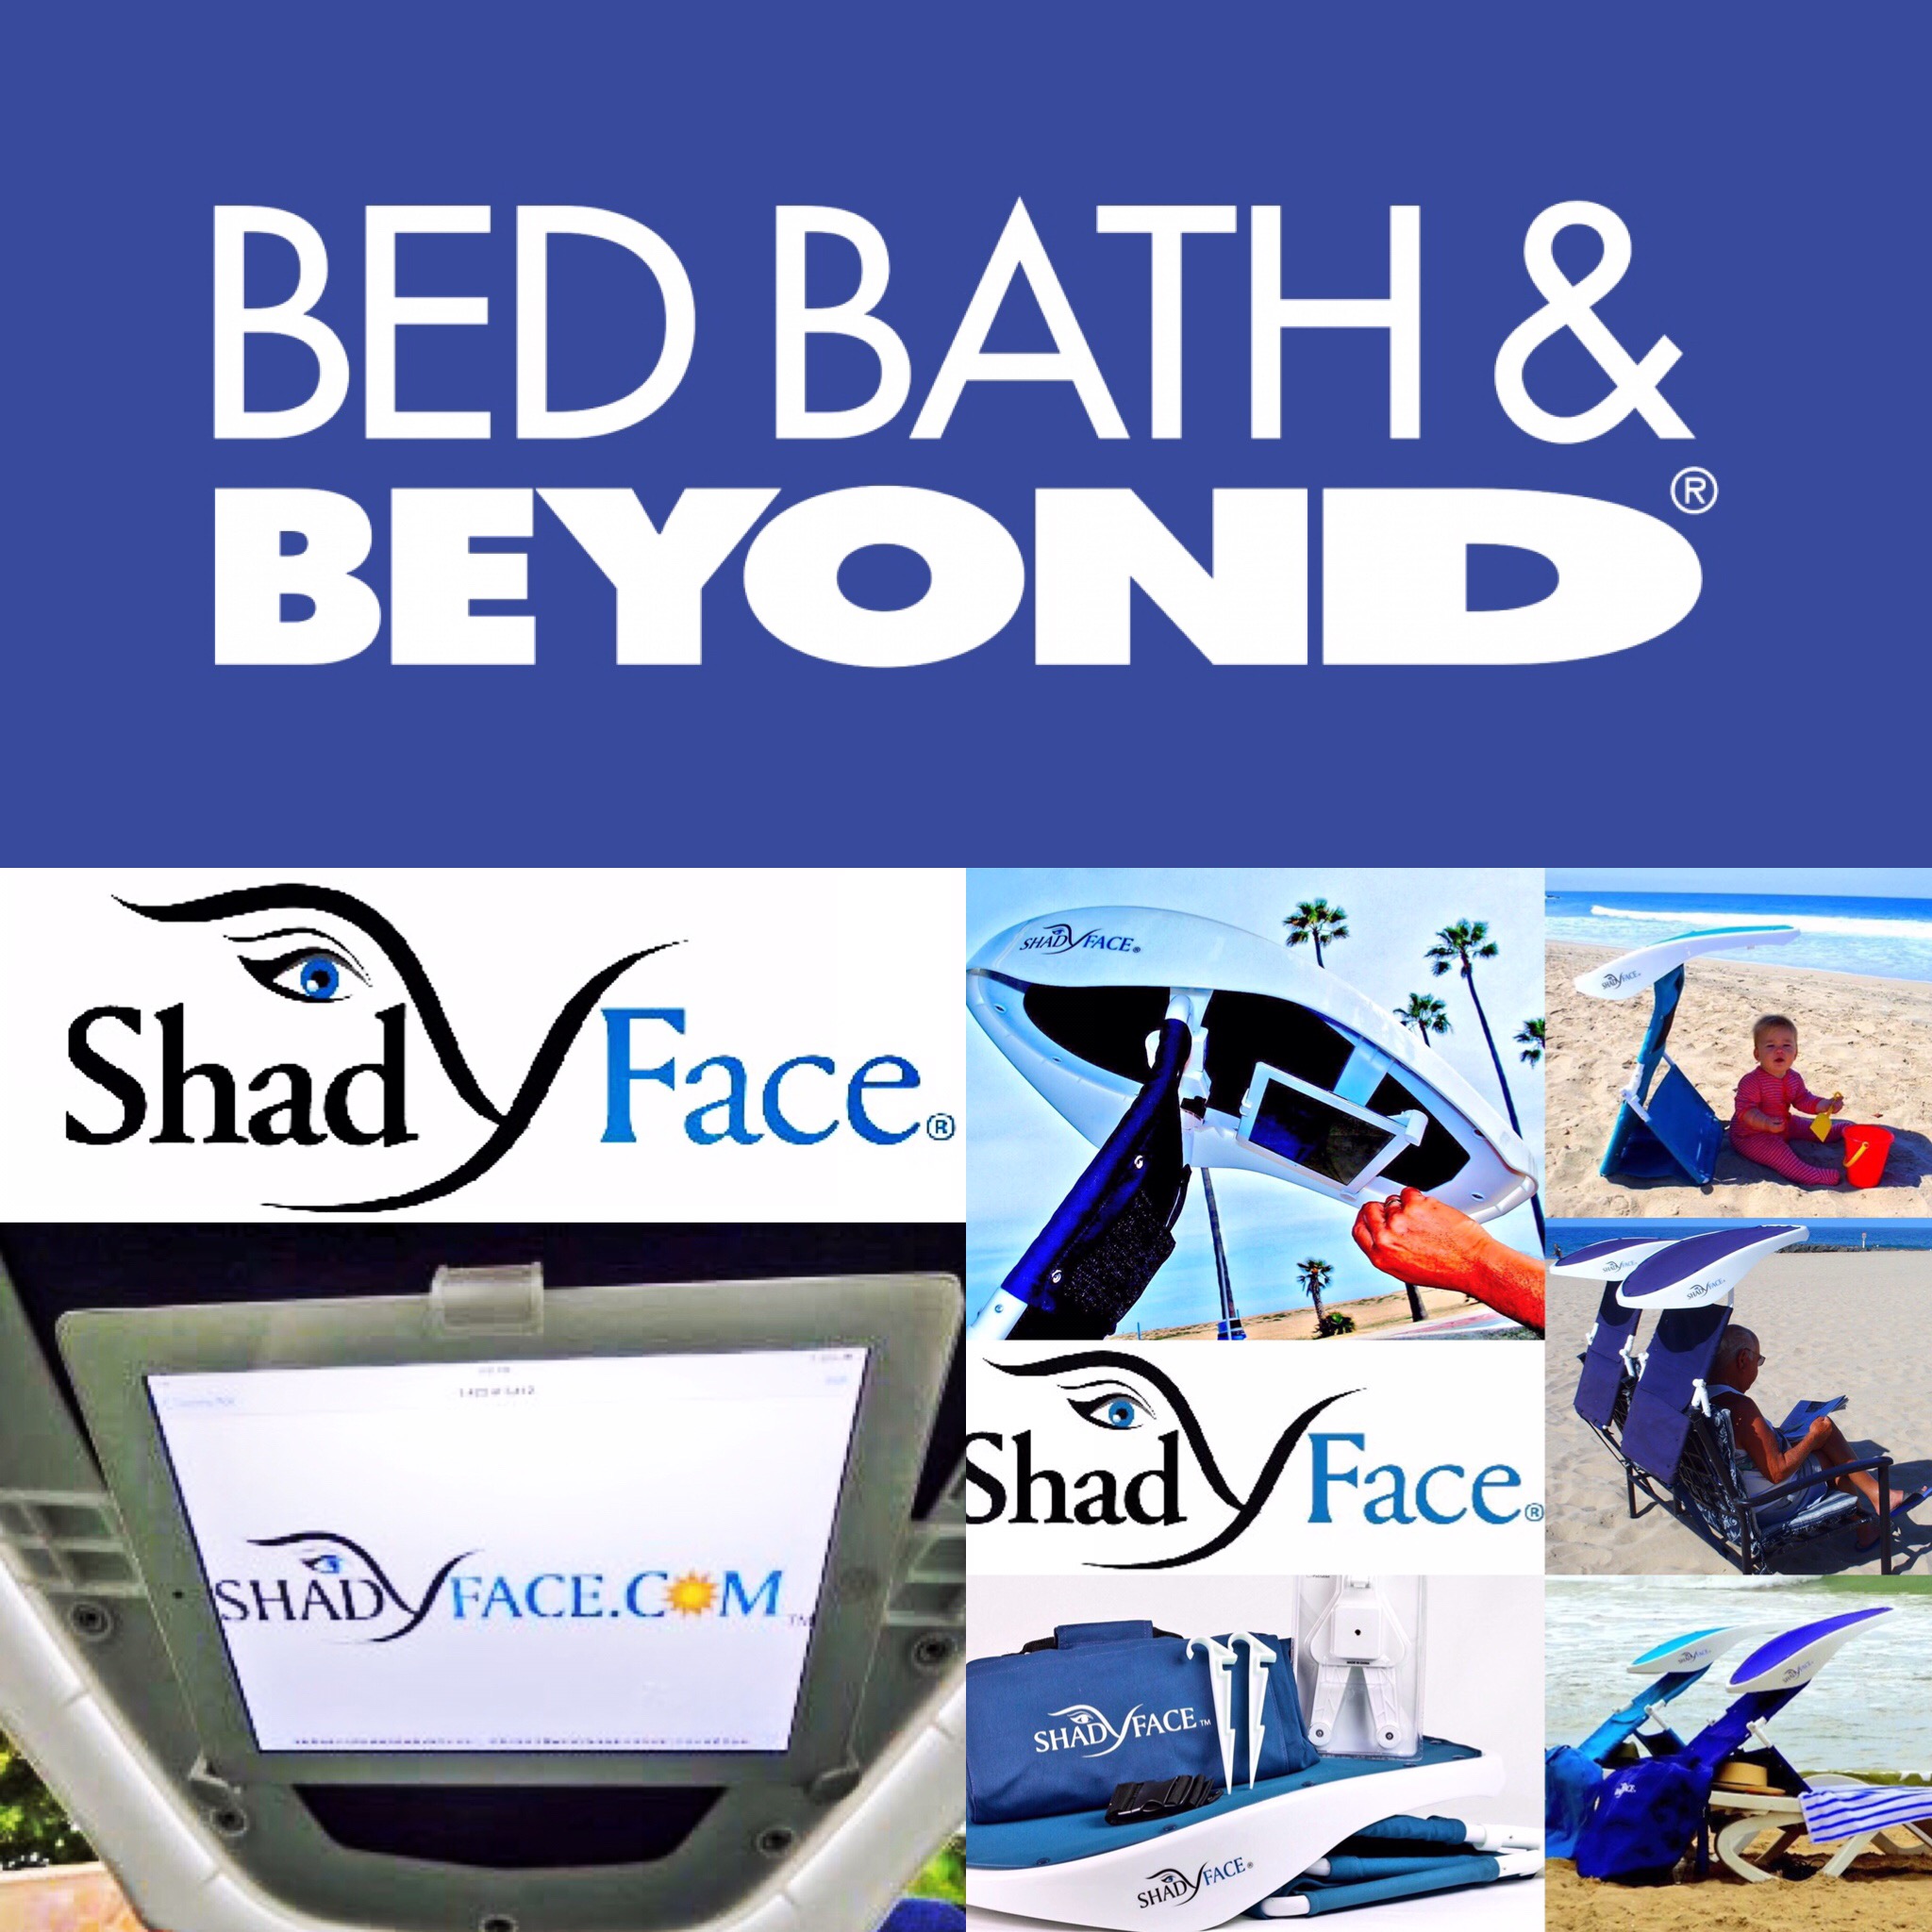 Bed Bath & Beyond has partnered with ShadyFace,Inc.for Spring 2019 Retail  Sales!